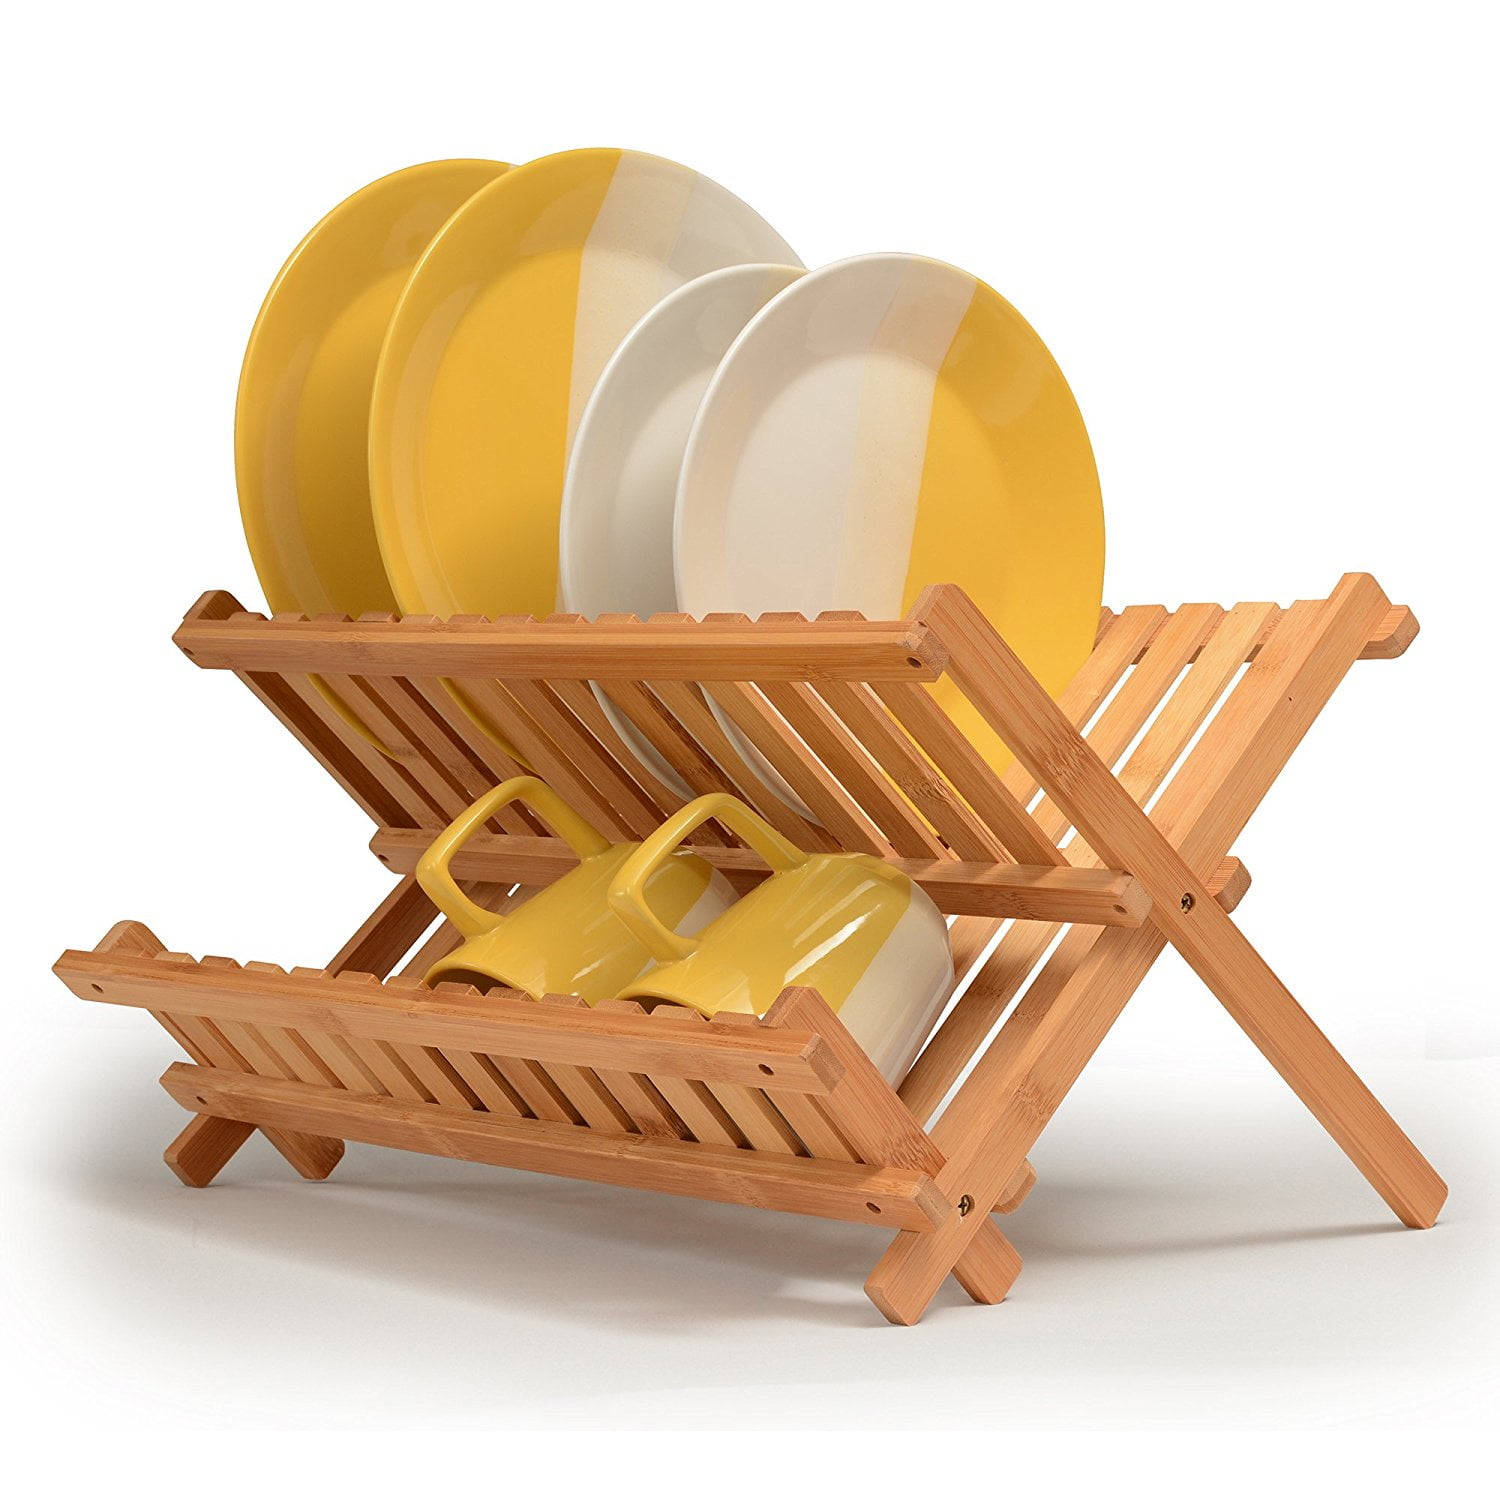 Sagler Wooden Dish Rack Plate Rack Collapsible Compact Dish Drying Rack Bamboo Dish Drainer